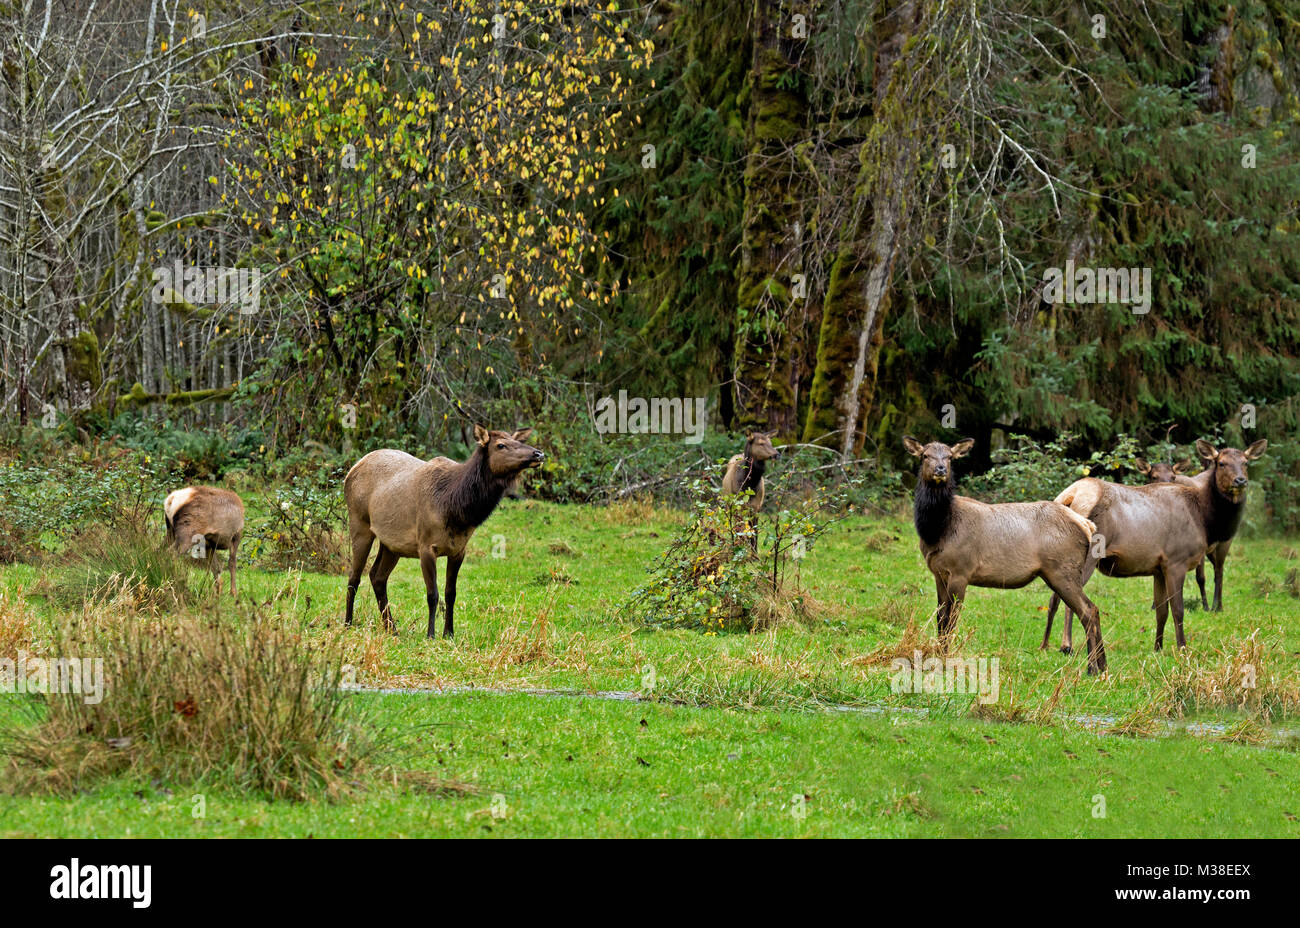 WA13324-00...WASHINGTON - Elk grazing in a meadow in the Quinault River Valley area of Olympic National Park. Stock Photo